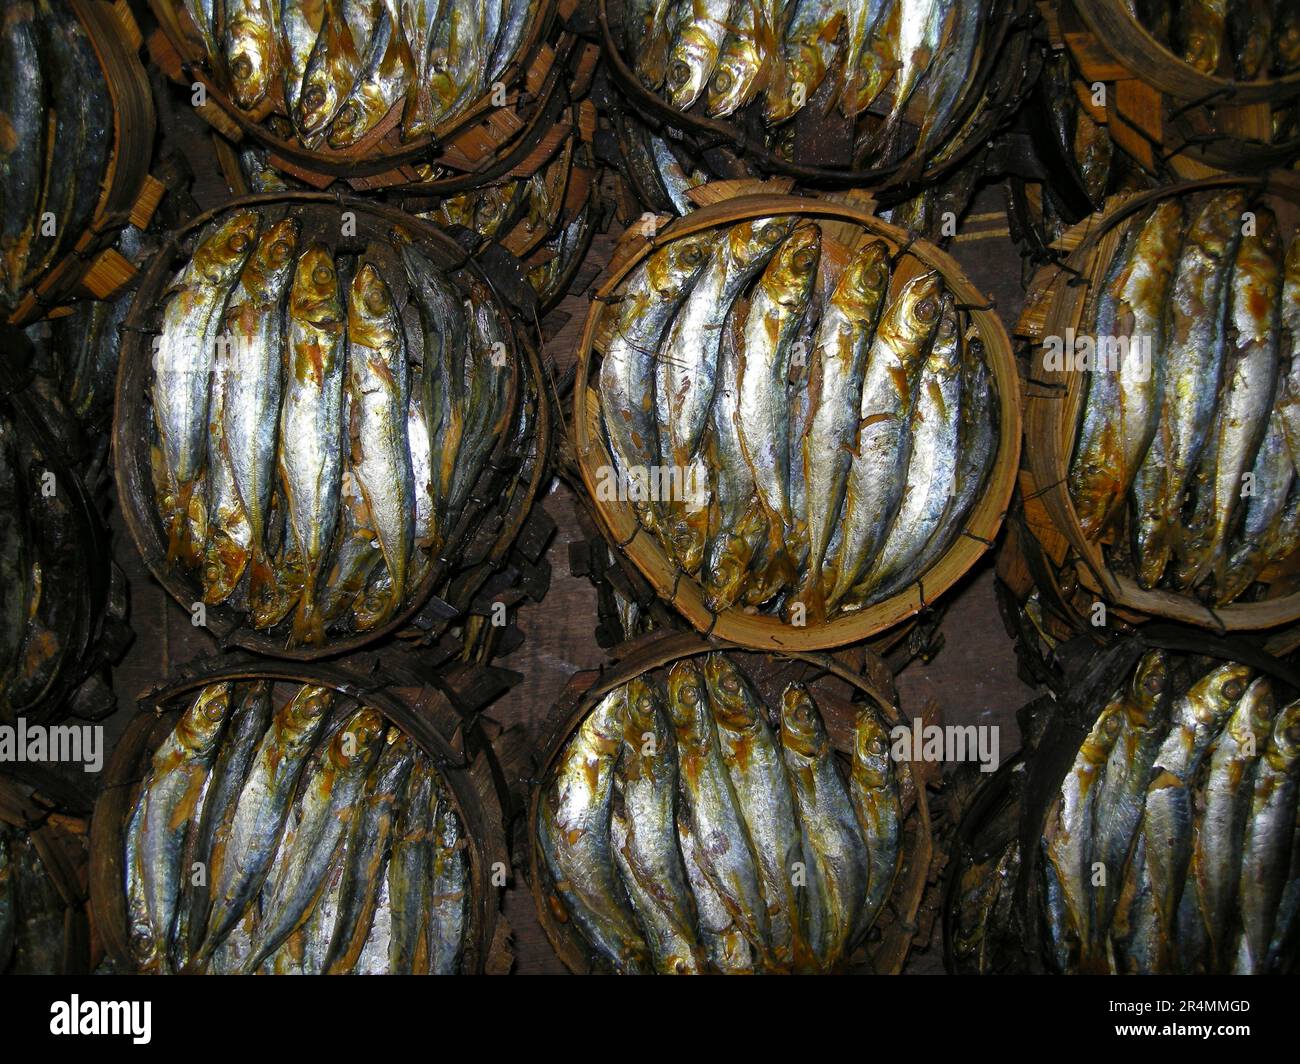 Dried fish in central market, Baguio, Philippines Stock Photo